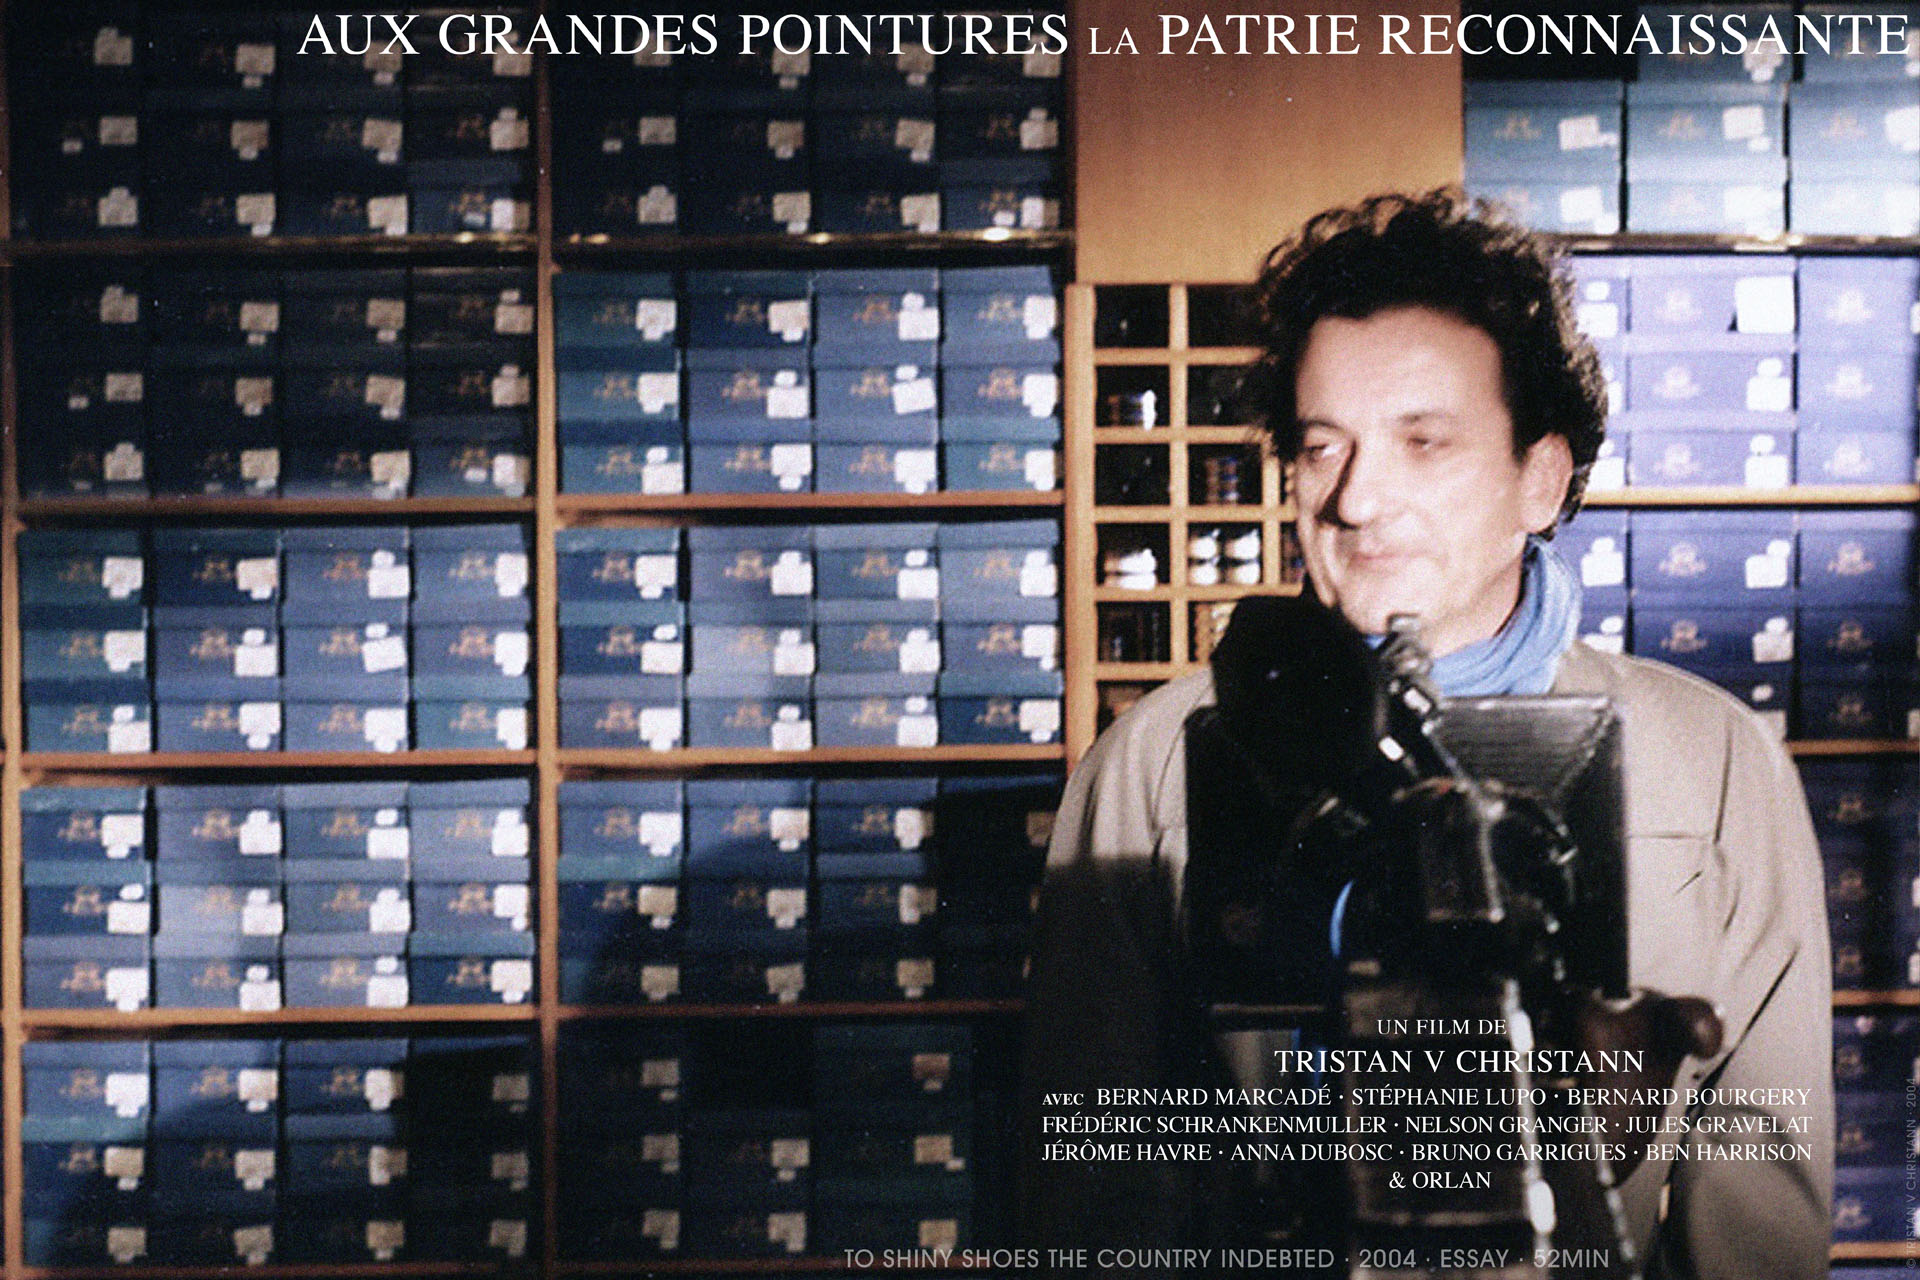 Tristan V Christann, Aux Grandes Pointures la Patrie Reconnaissante, To Large Size Shoes the Country Indebted, Bernard Marcade, Orlan, Stephanie Lupo